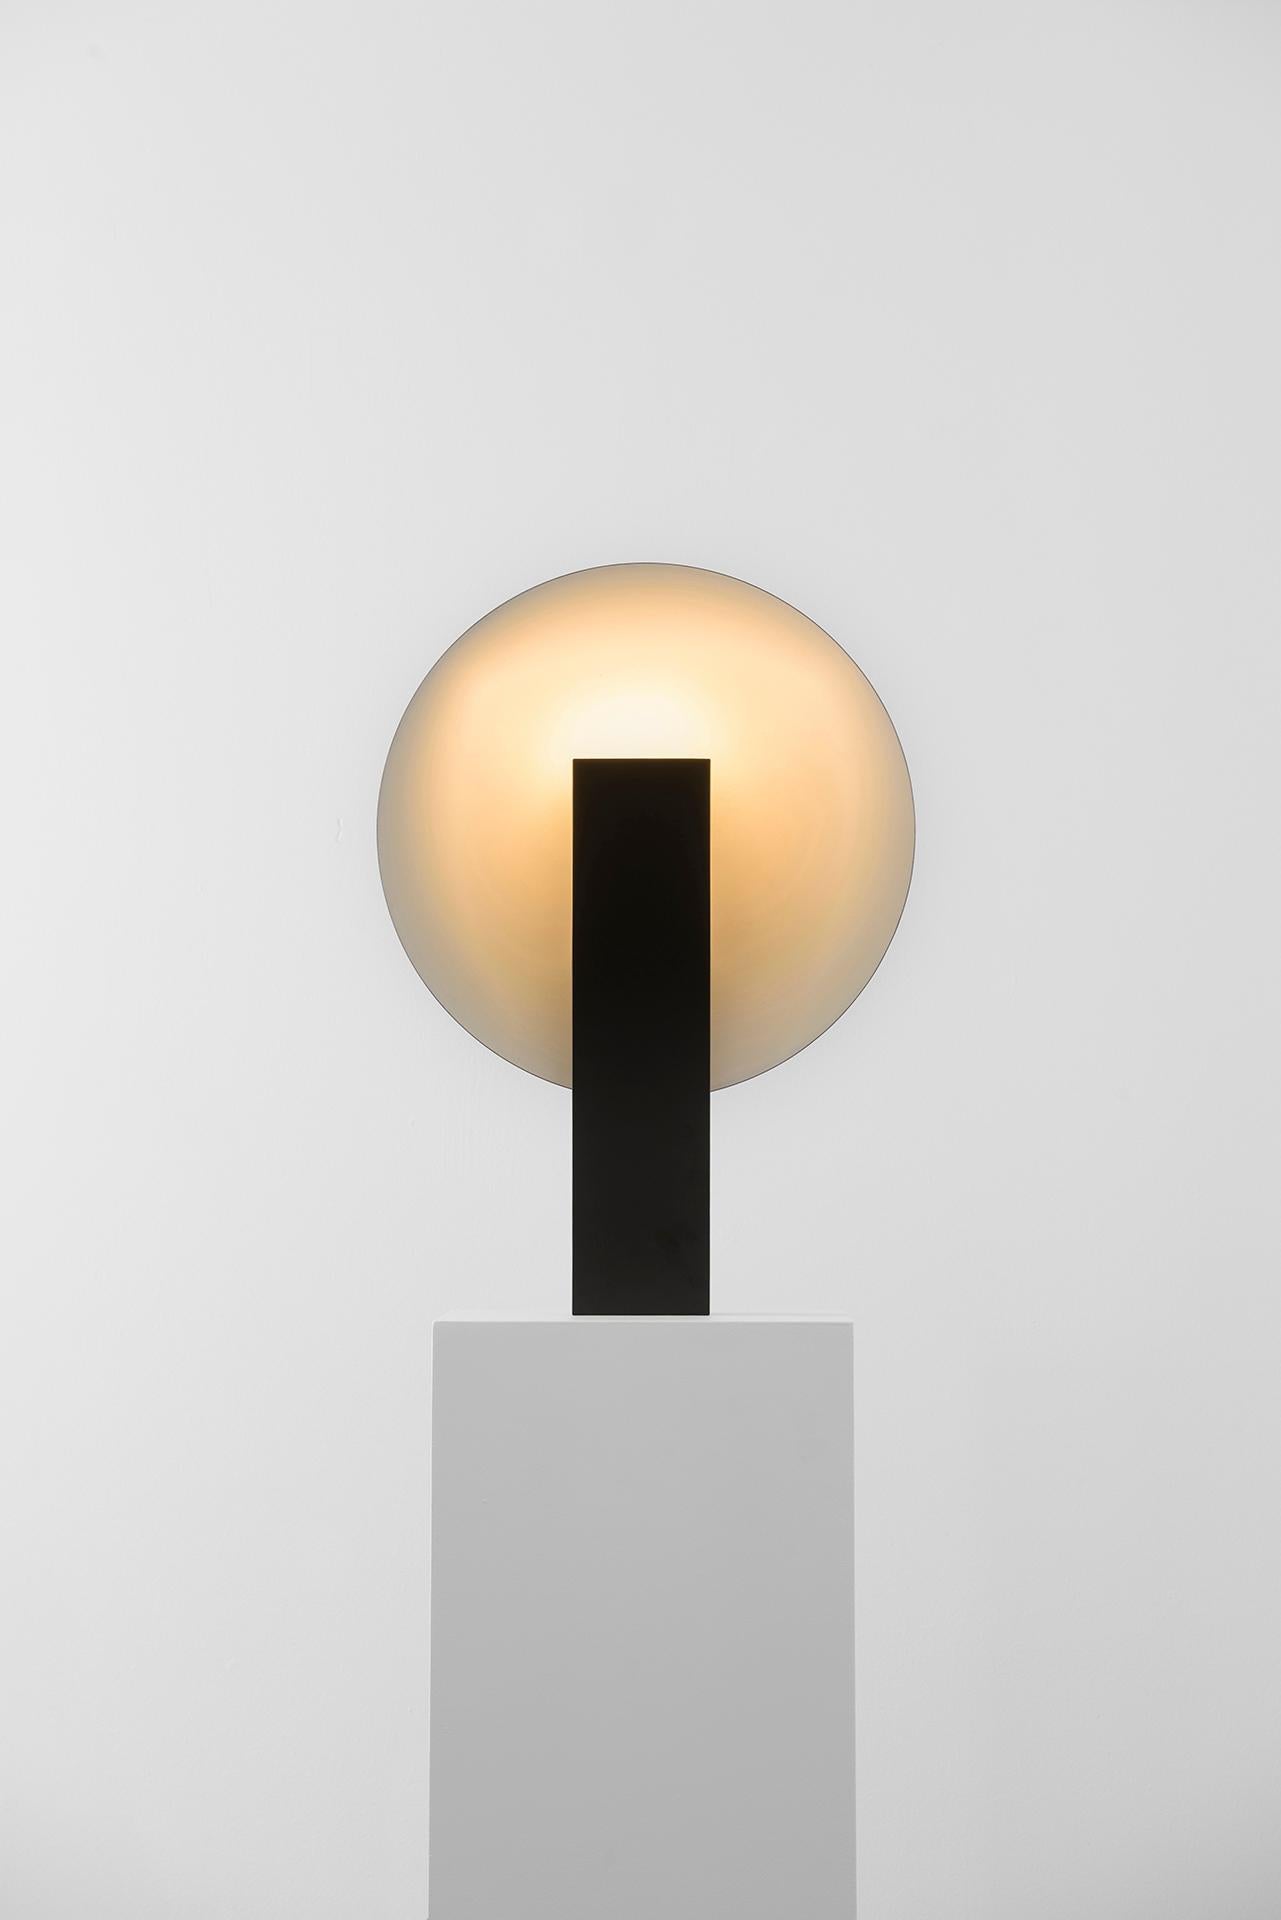 ORBE is a table lamp with indirect light, designed to provide soft illumination to the environment.

The piece has a simple structure, composed by the minimum required for its functionality: the front box houses the light source and provides the